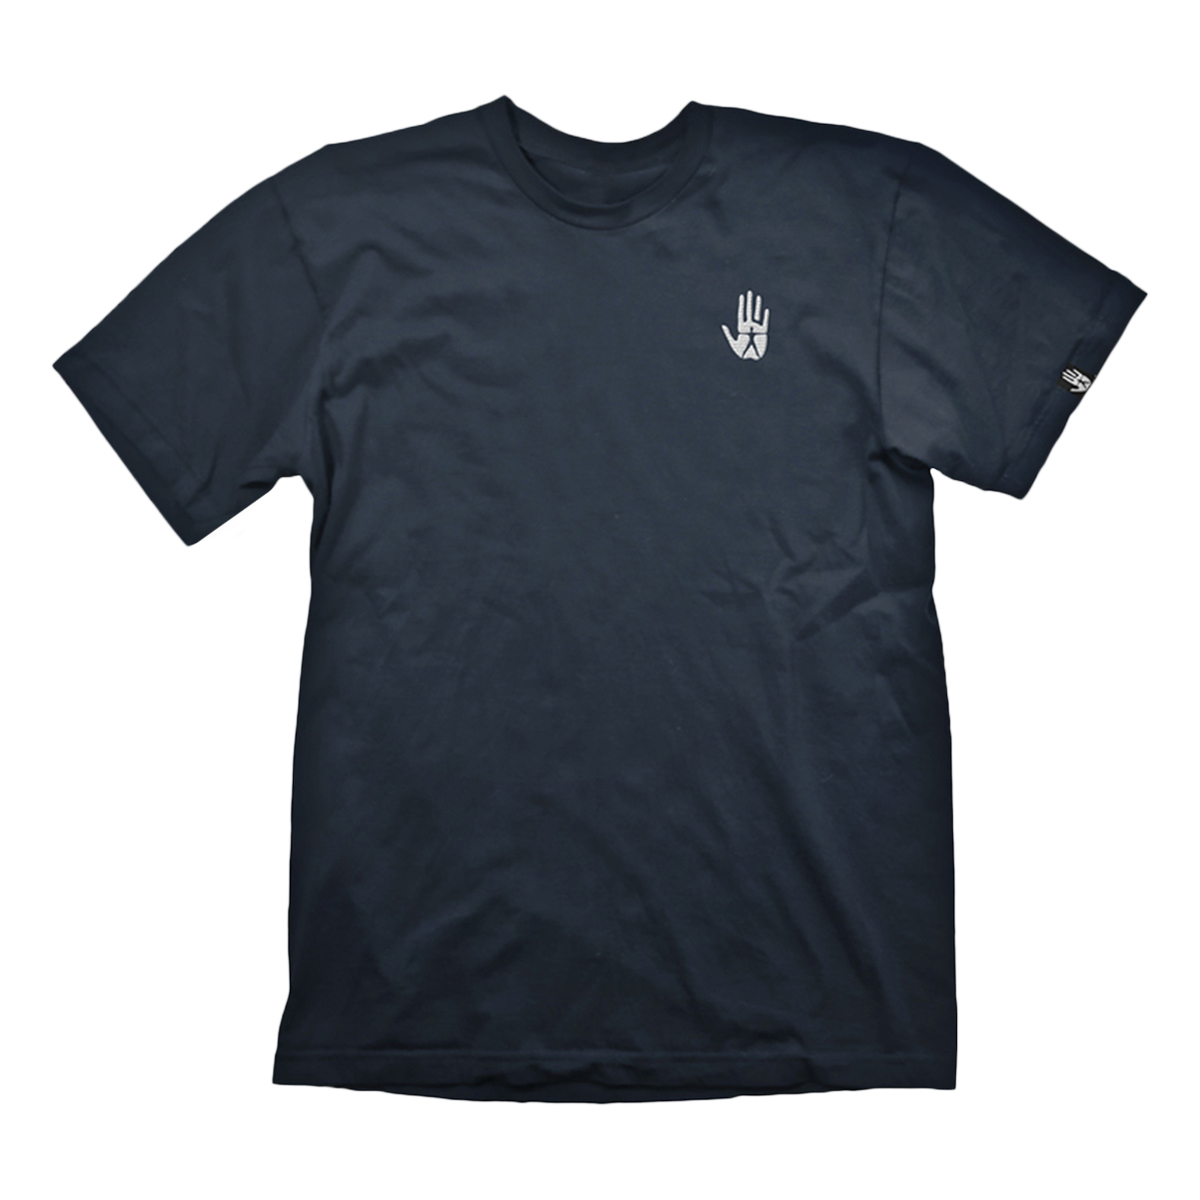 Humankind T-Shirt "Small Icon" navy